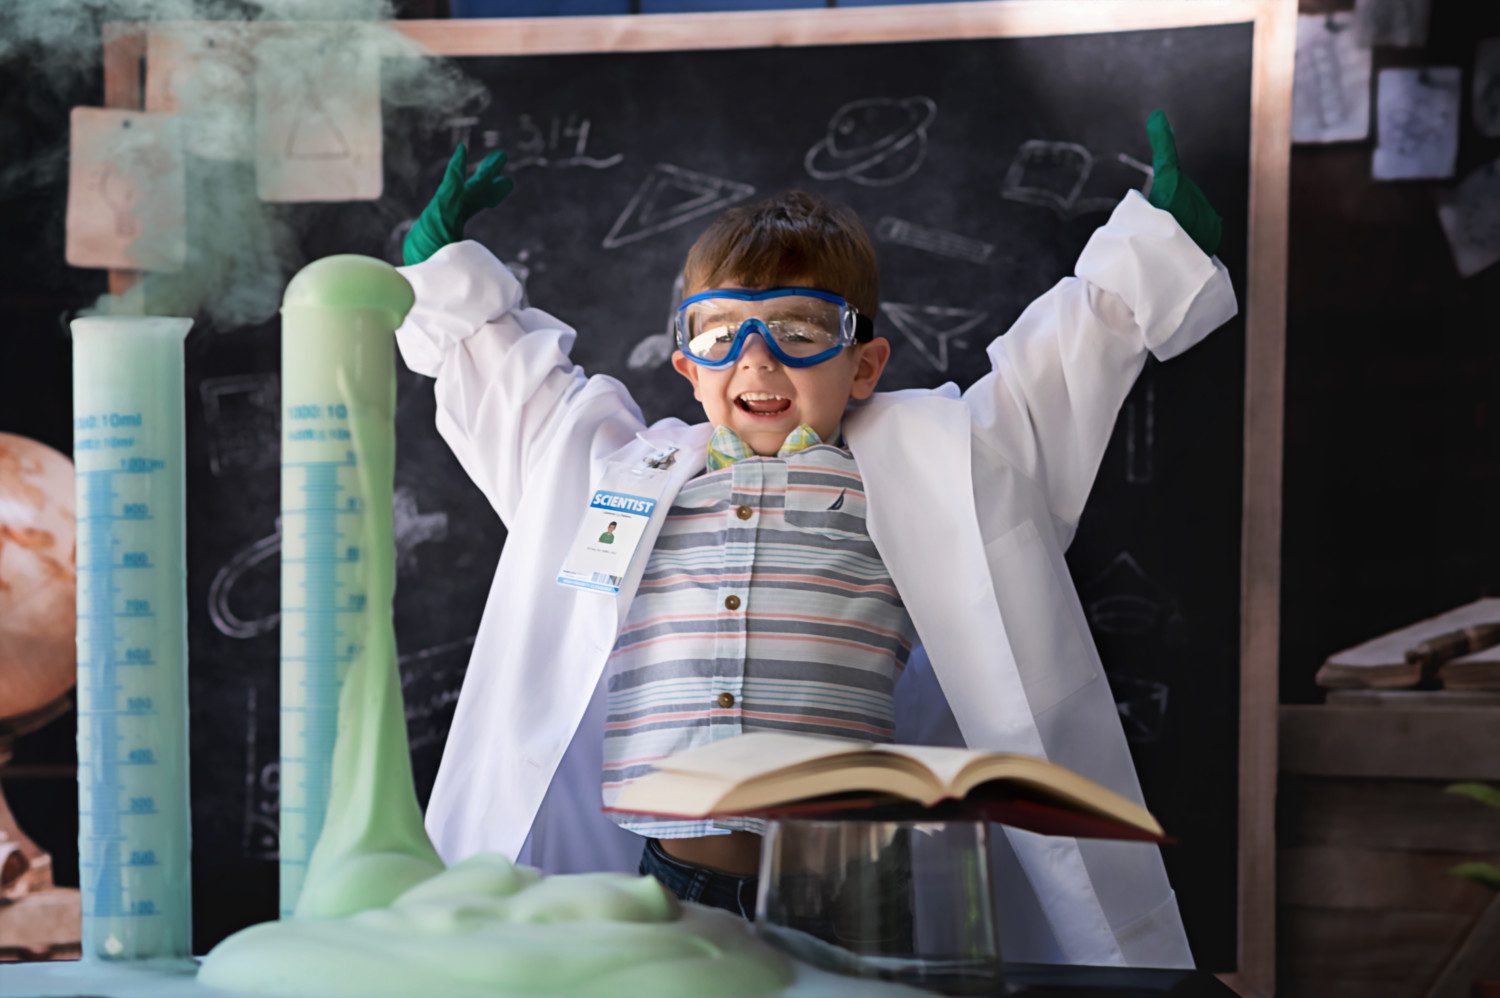 Jenn carroll photography, jenn carroll photographer, unicorn magic, storybook sessions, storybook photography, storyteller, childhood magic, young scientist, elephant toothpaste, science experiment, scientist, lab work, lab discovery, let them explore, kid science, baby dream backdrops